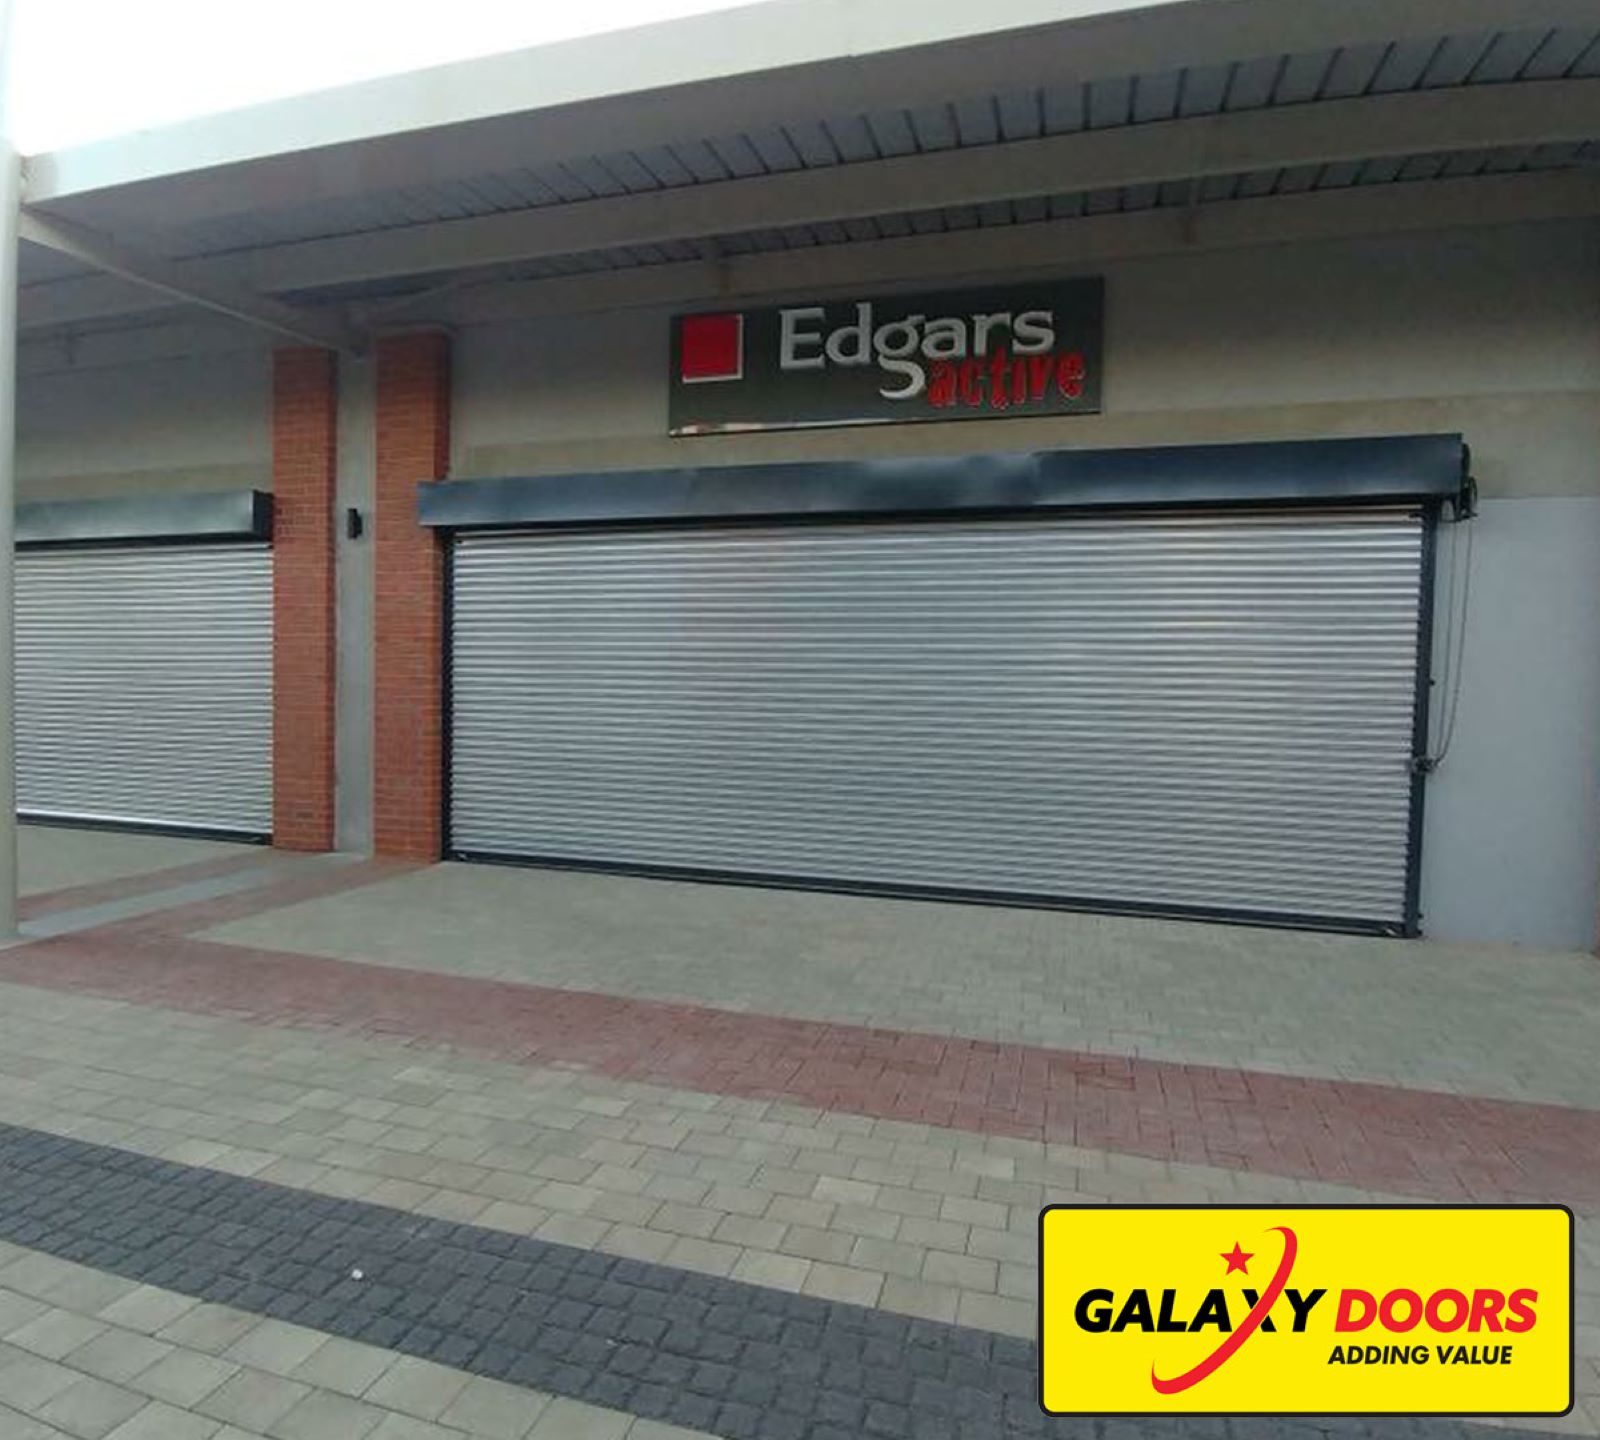 Galaxy Door franchise for sale